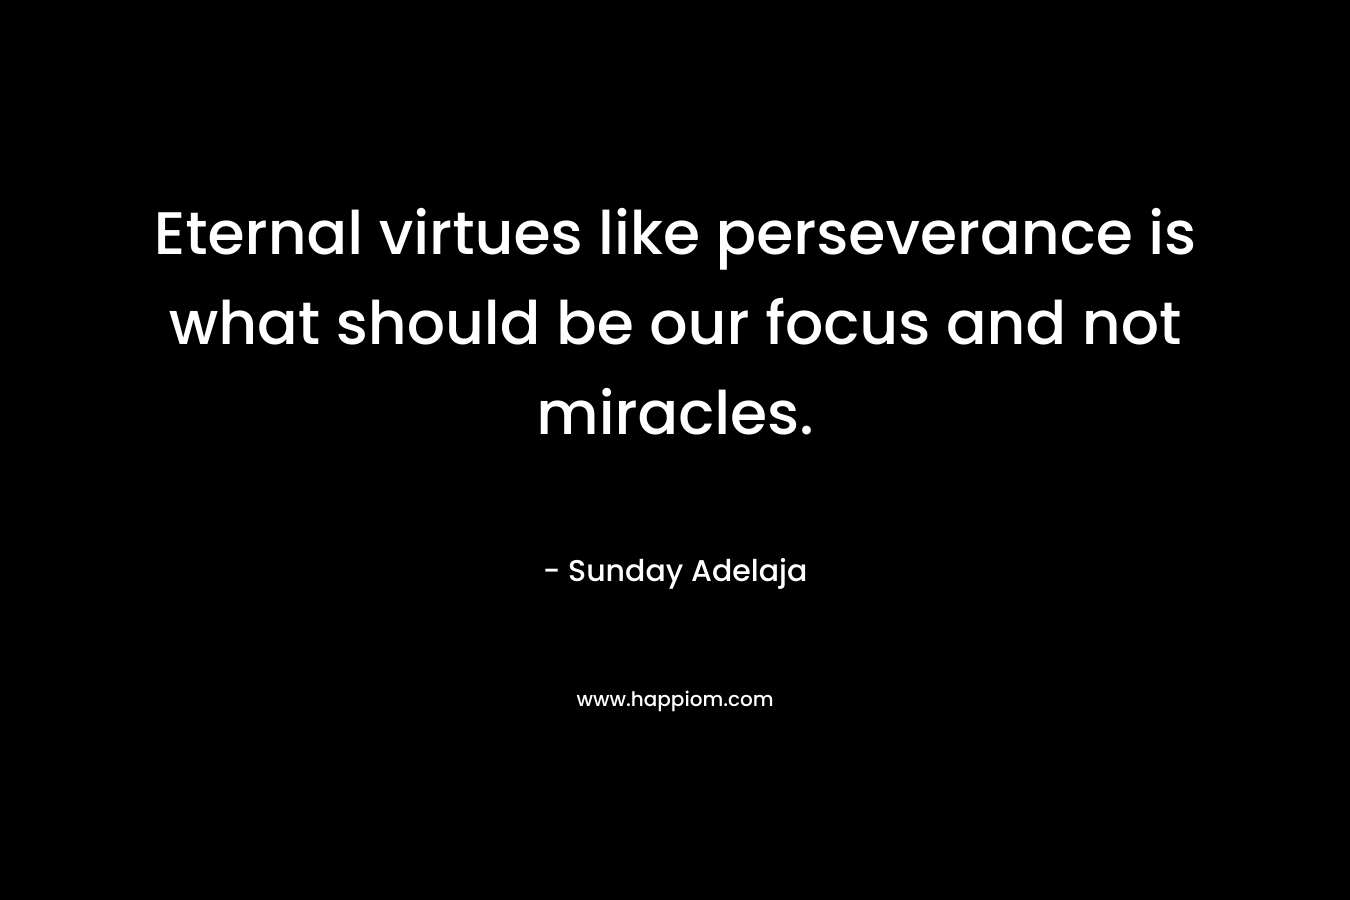 Eternal virtues like perseverance is what should be our focus and not miracles.